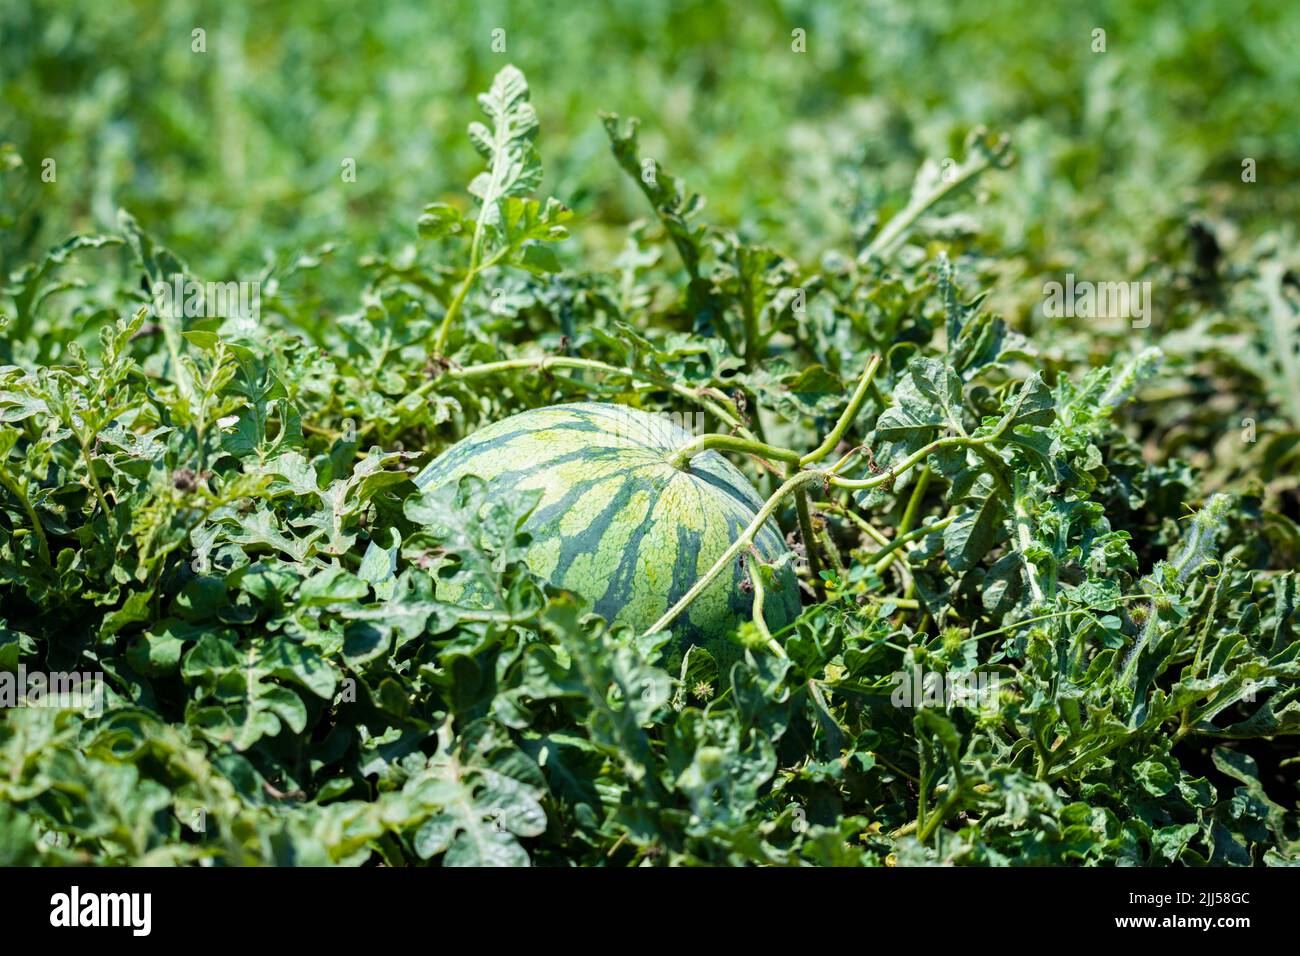 Round growing hidden watermelon bathed in sunlight Stock Photo